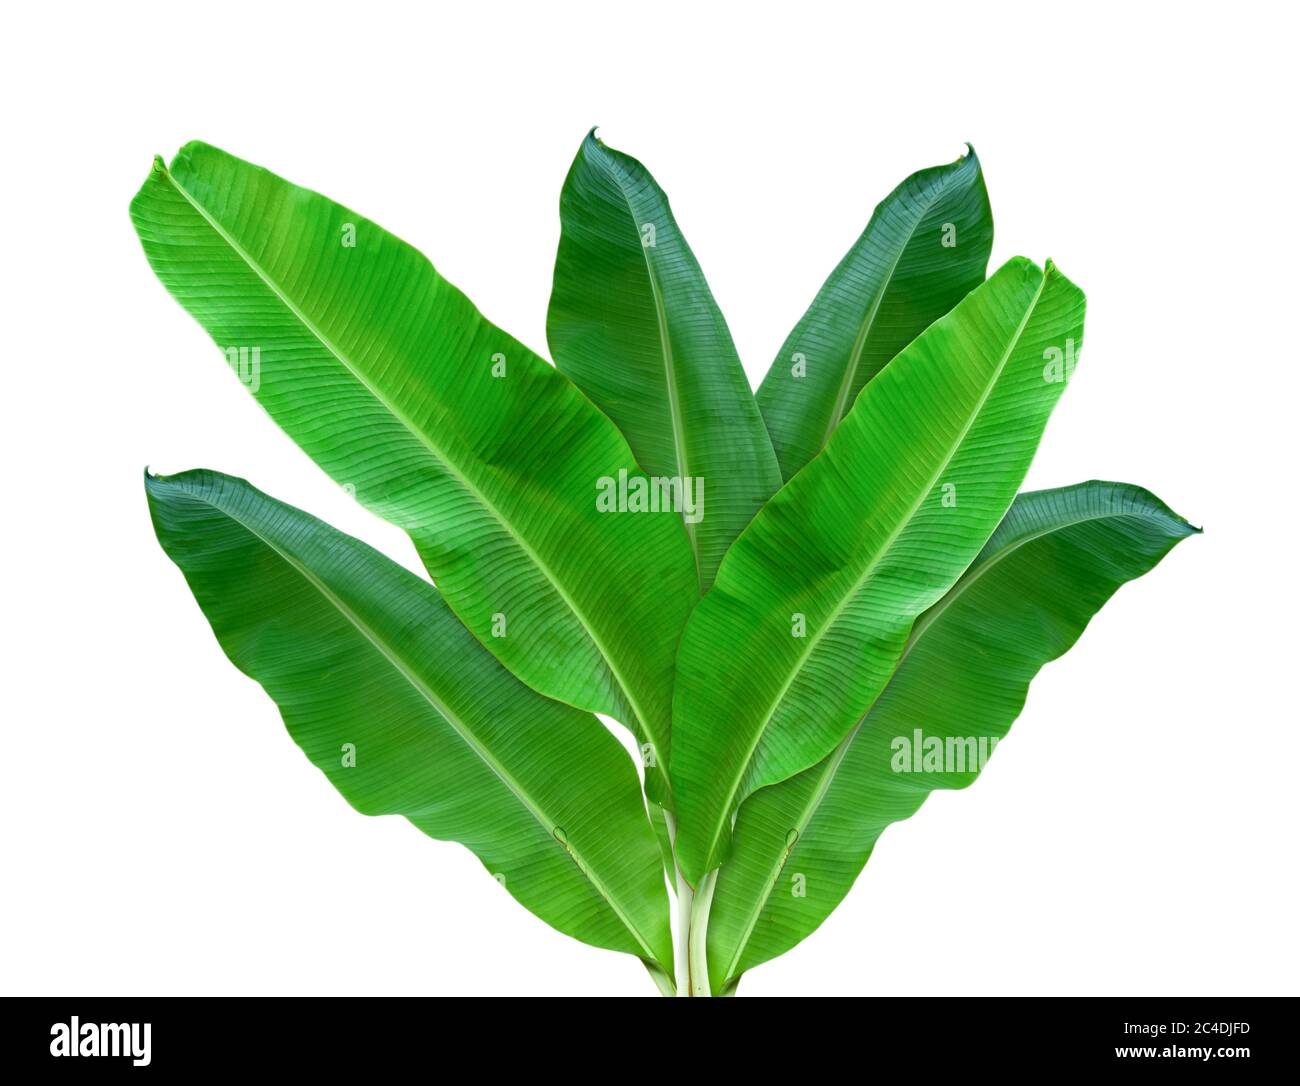 banana leaf leaf isolated on a white background, including clipping paths.  HD Image and Large Resolution. can be used as wallpaper Stock Photo - Alamy